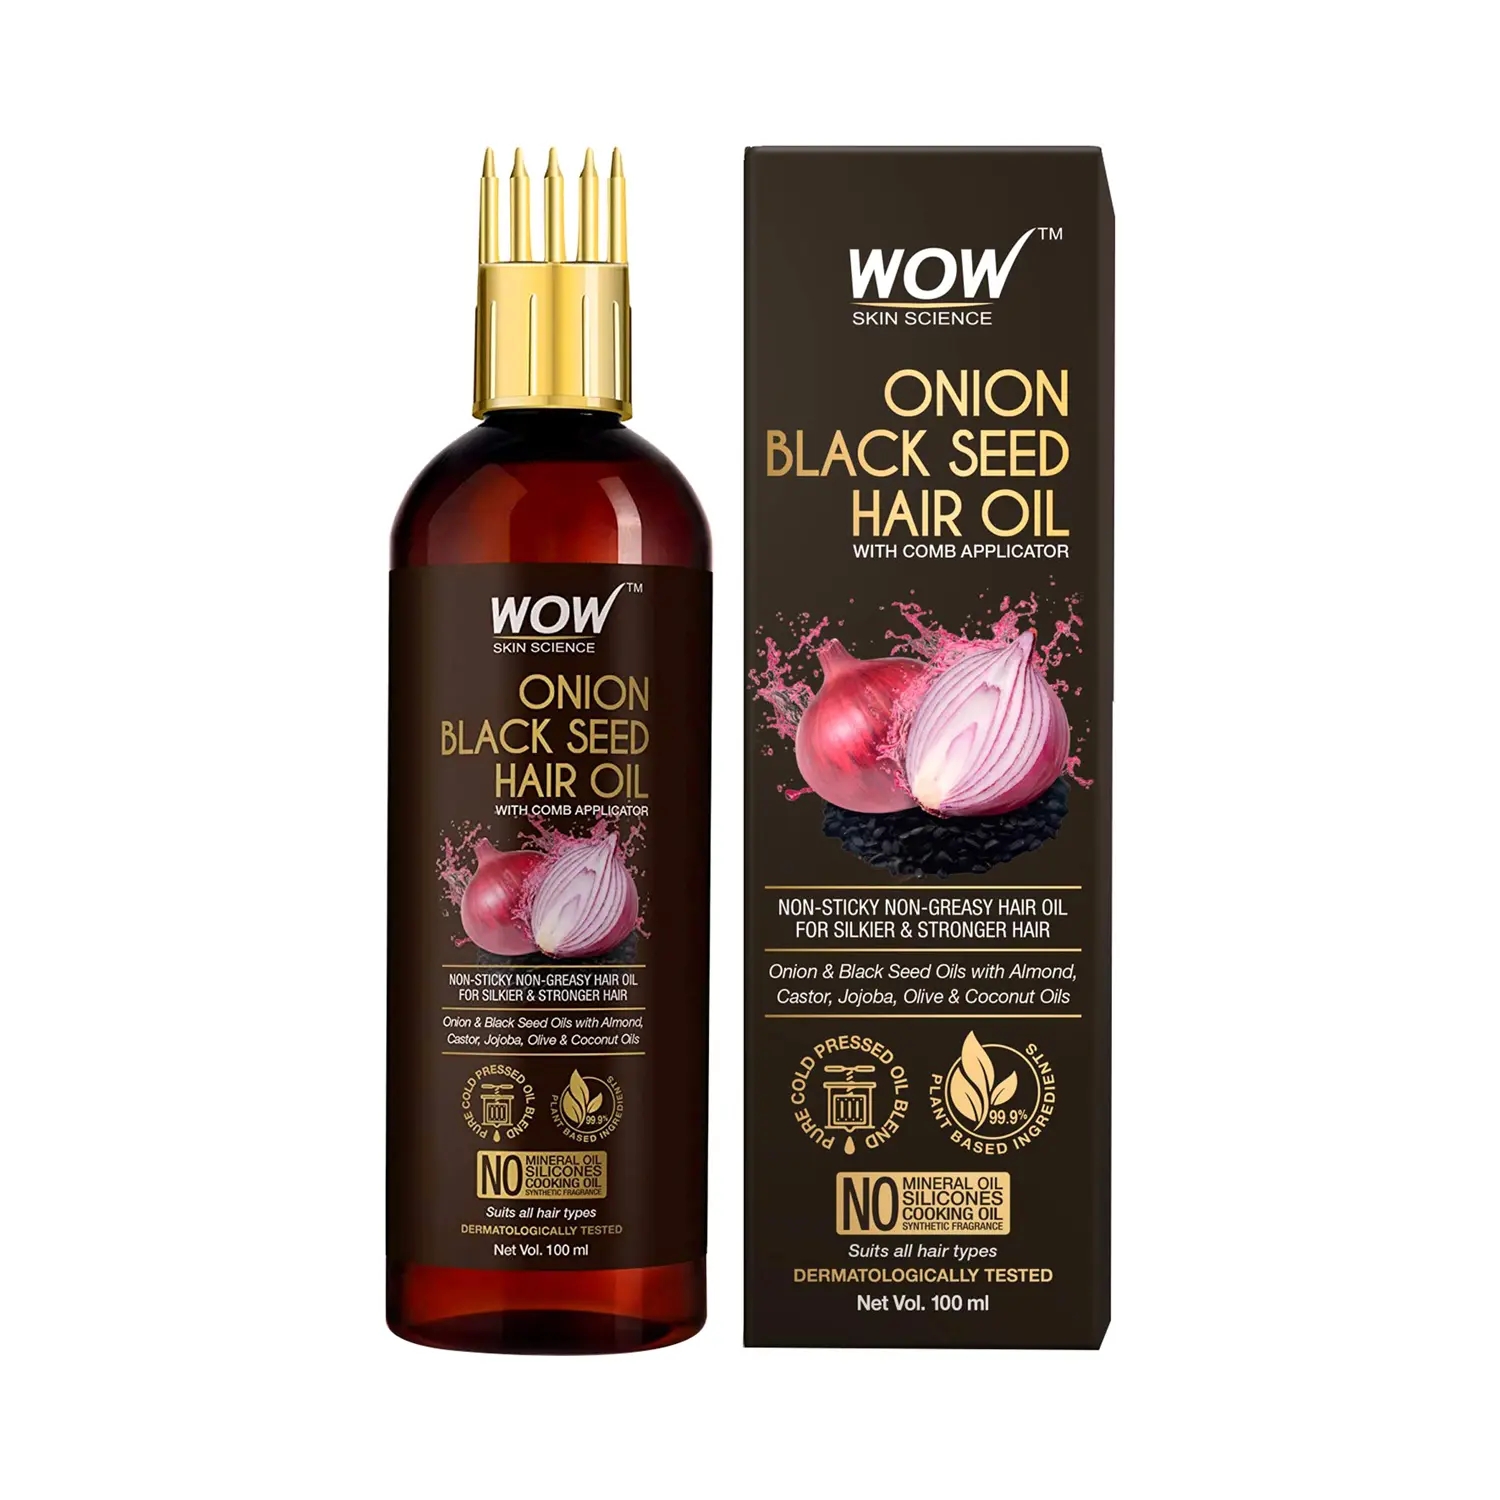 WOW SKIN SCIENCE Onion Black Seed Hair Oil With Comb Applicator (100ml)